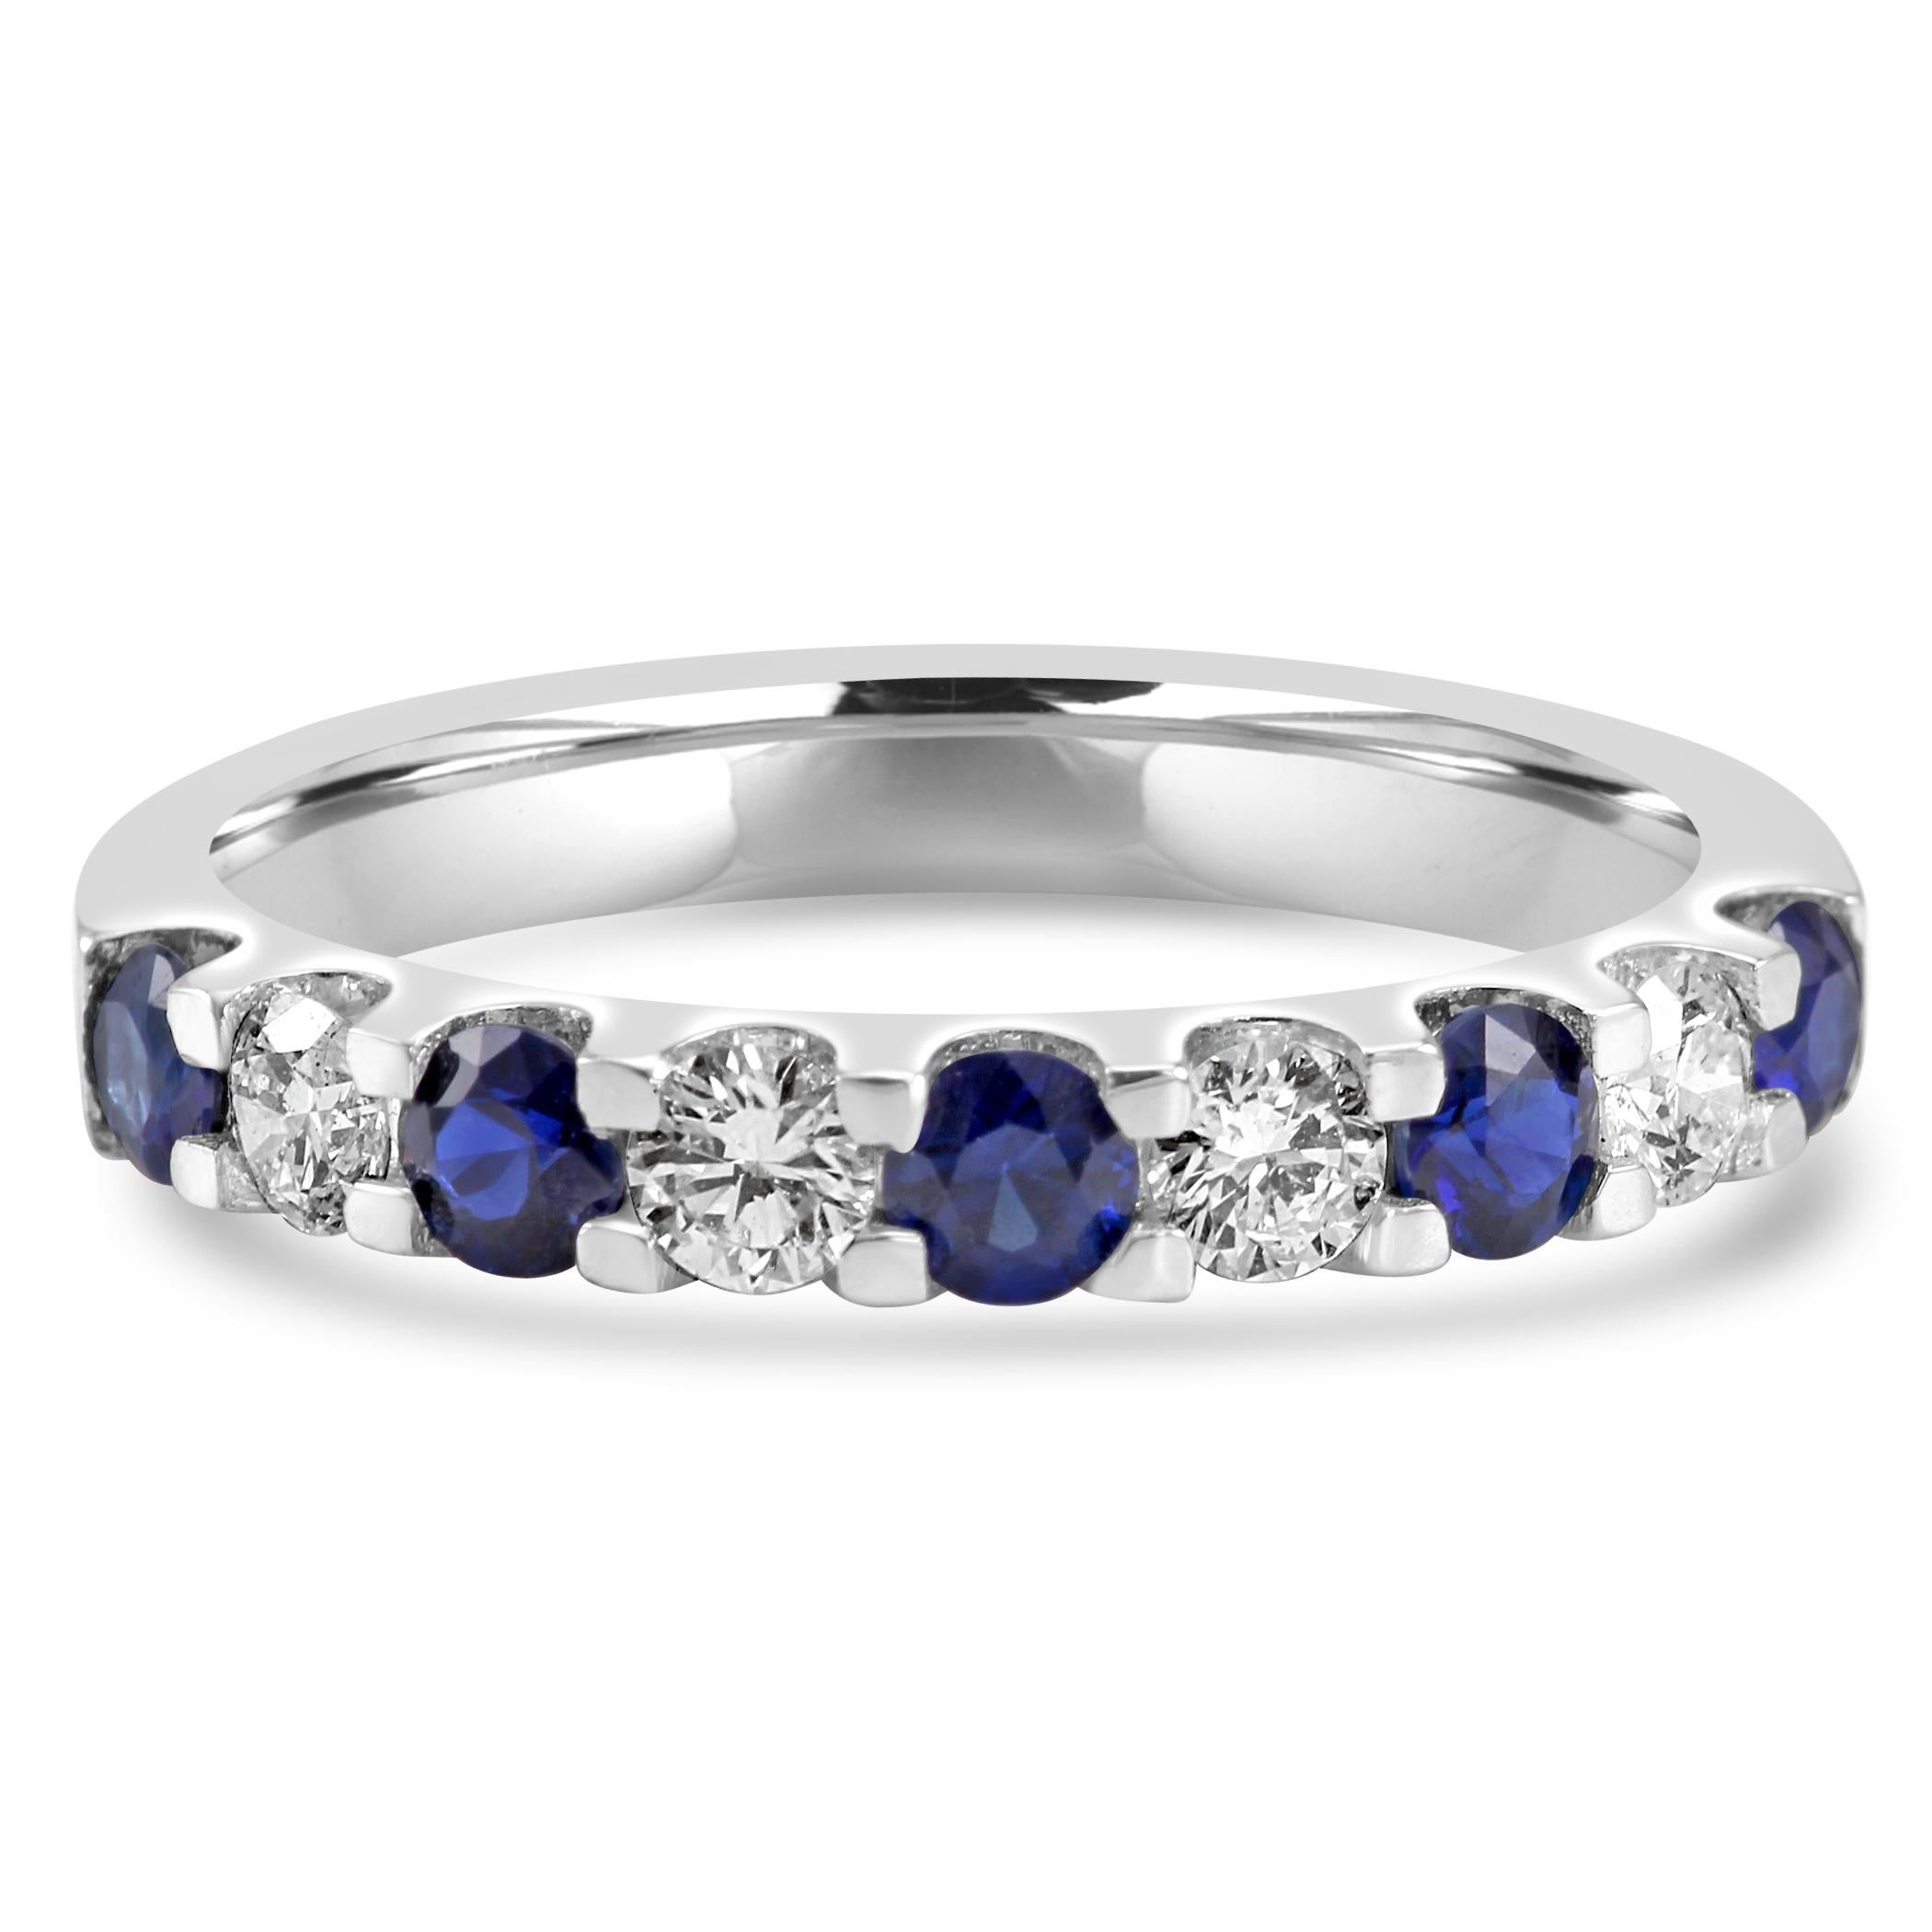 For Sale:  Blue Sapphire White Diamond Round 18K White Gold Fashion Engagement Band Ring 8